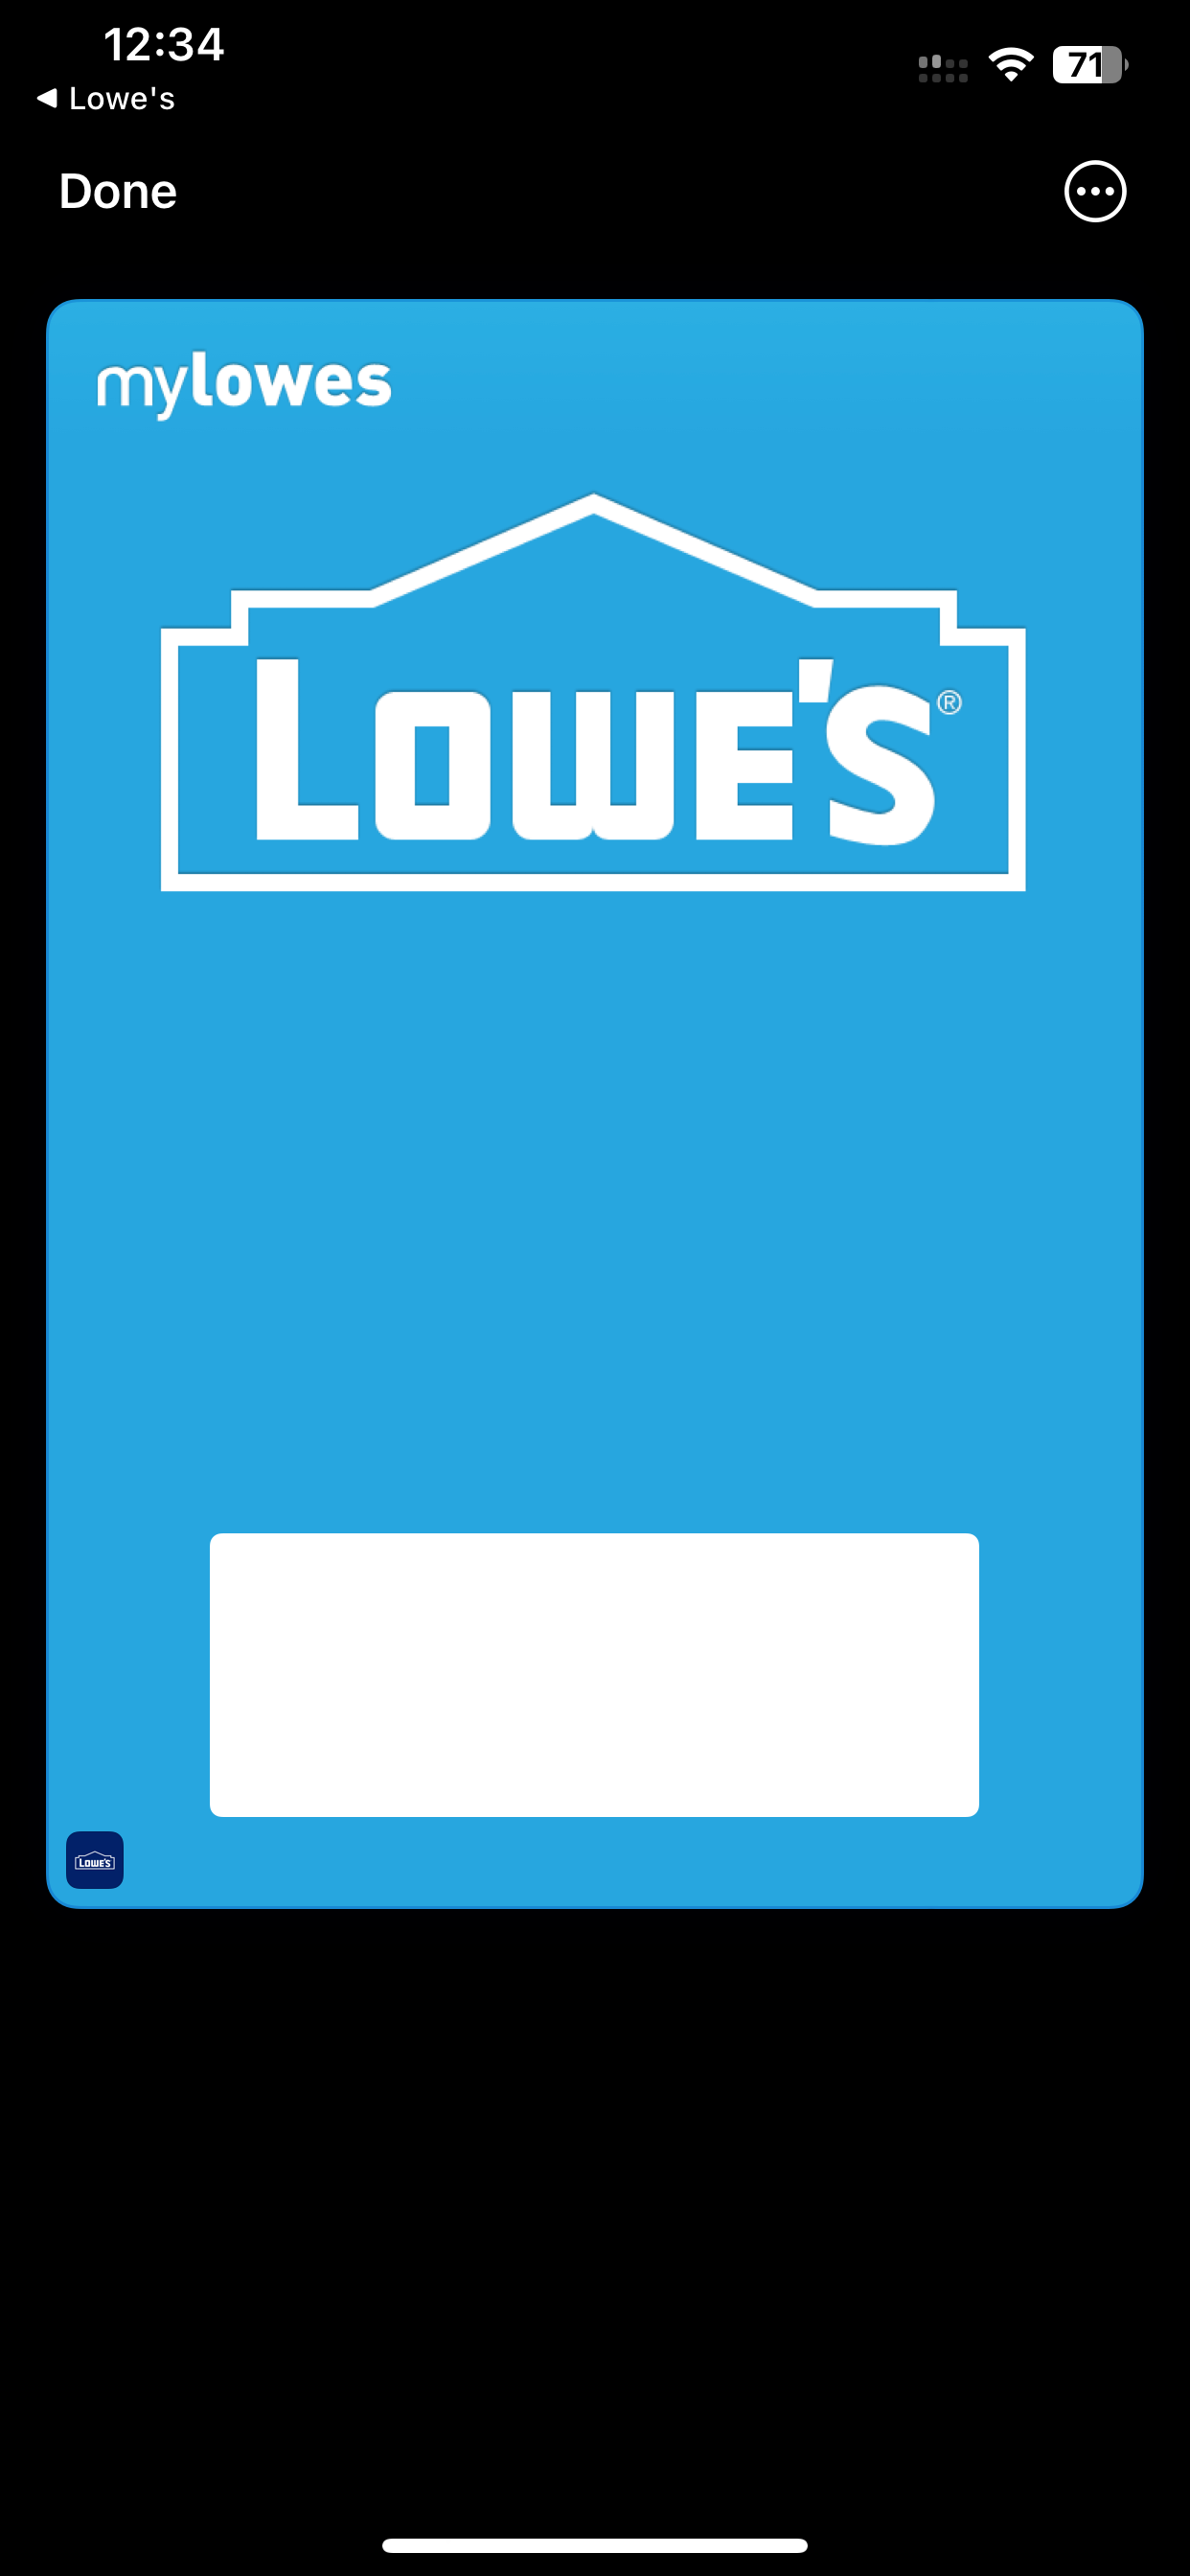 Lowe's supports adding its MyLowe's rewards pass to Apple Wallet.